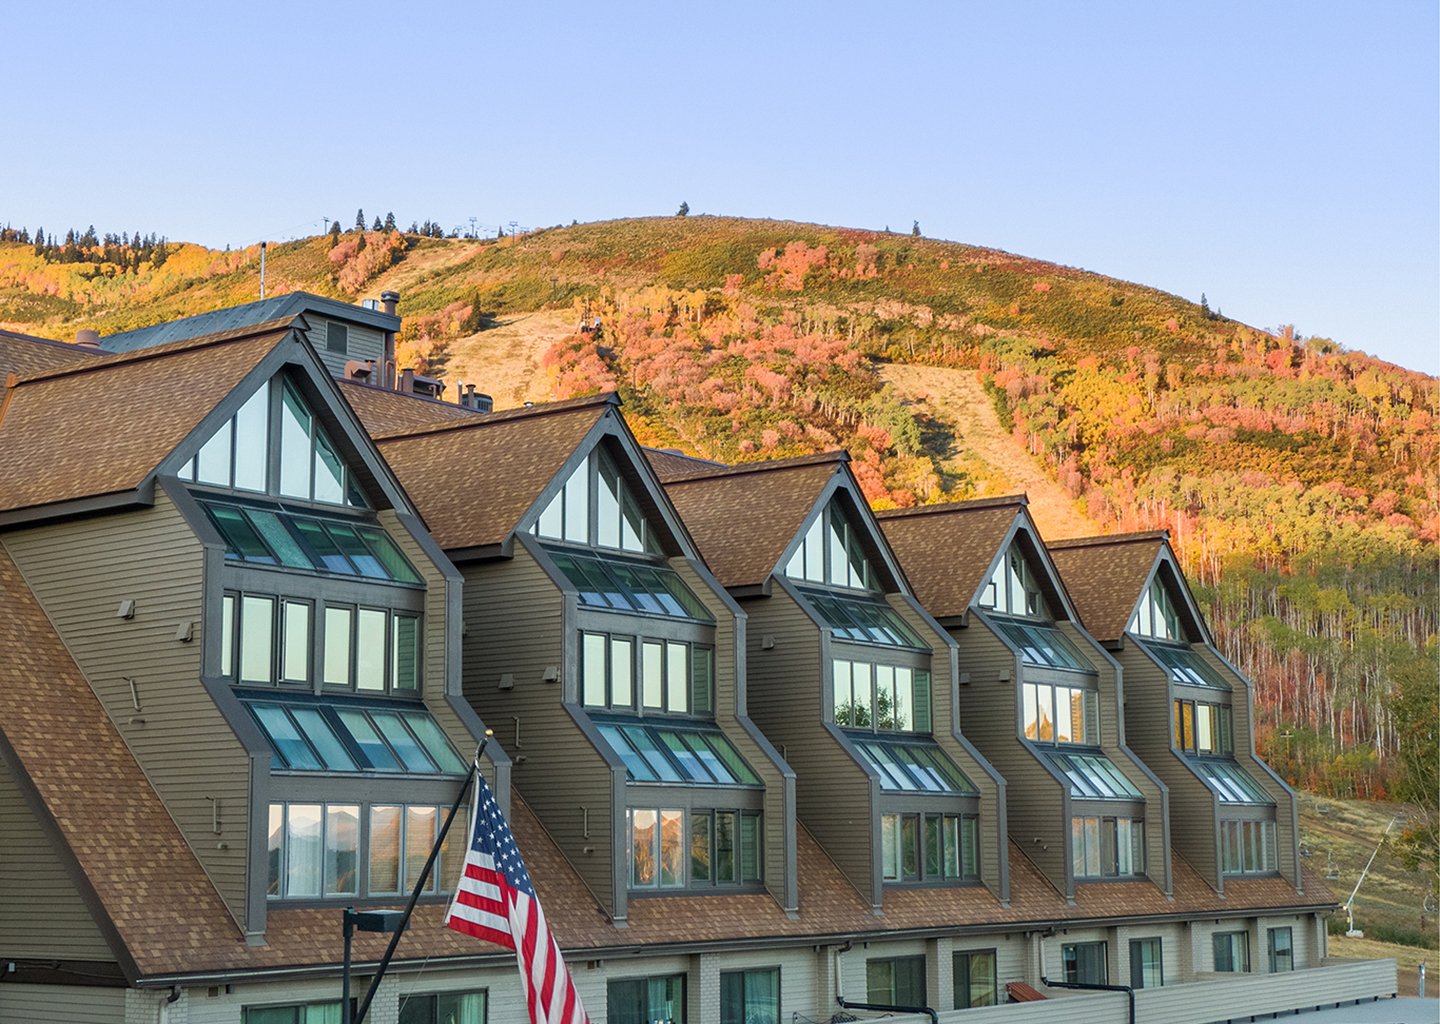 The Lodge at the Mountain Village, Park City, UT